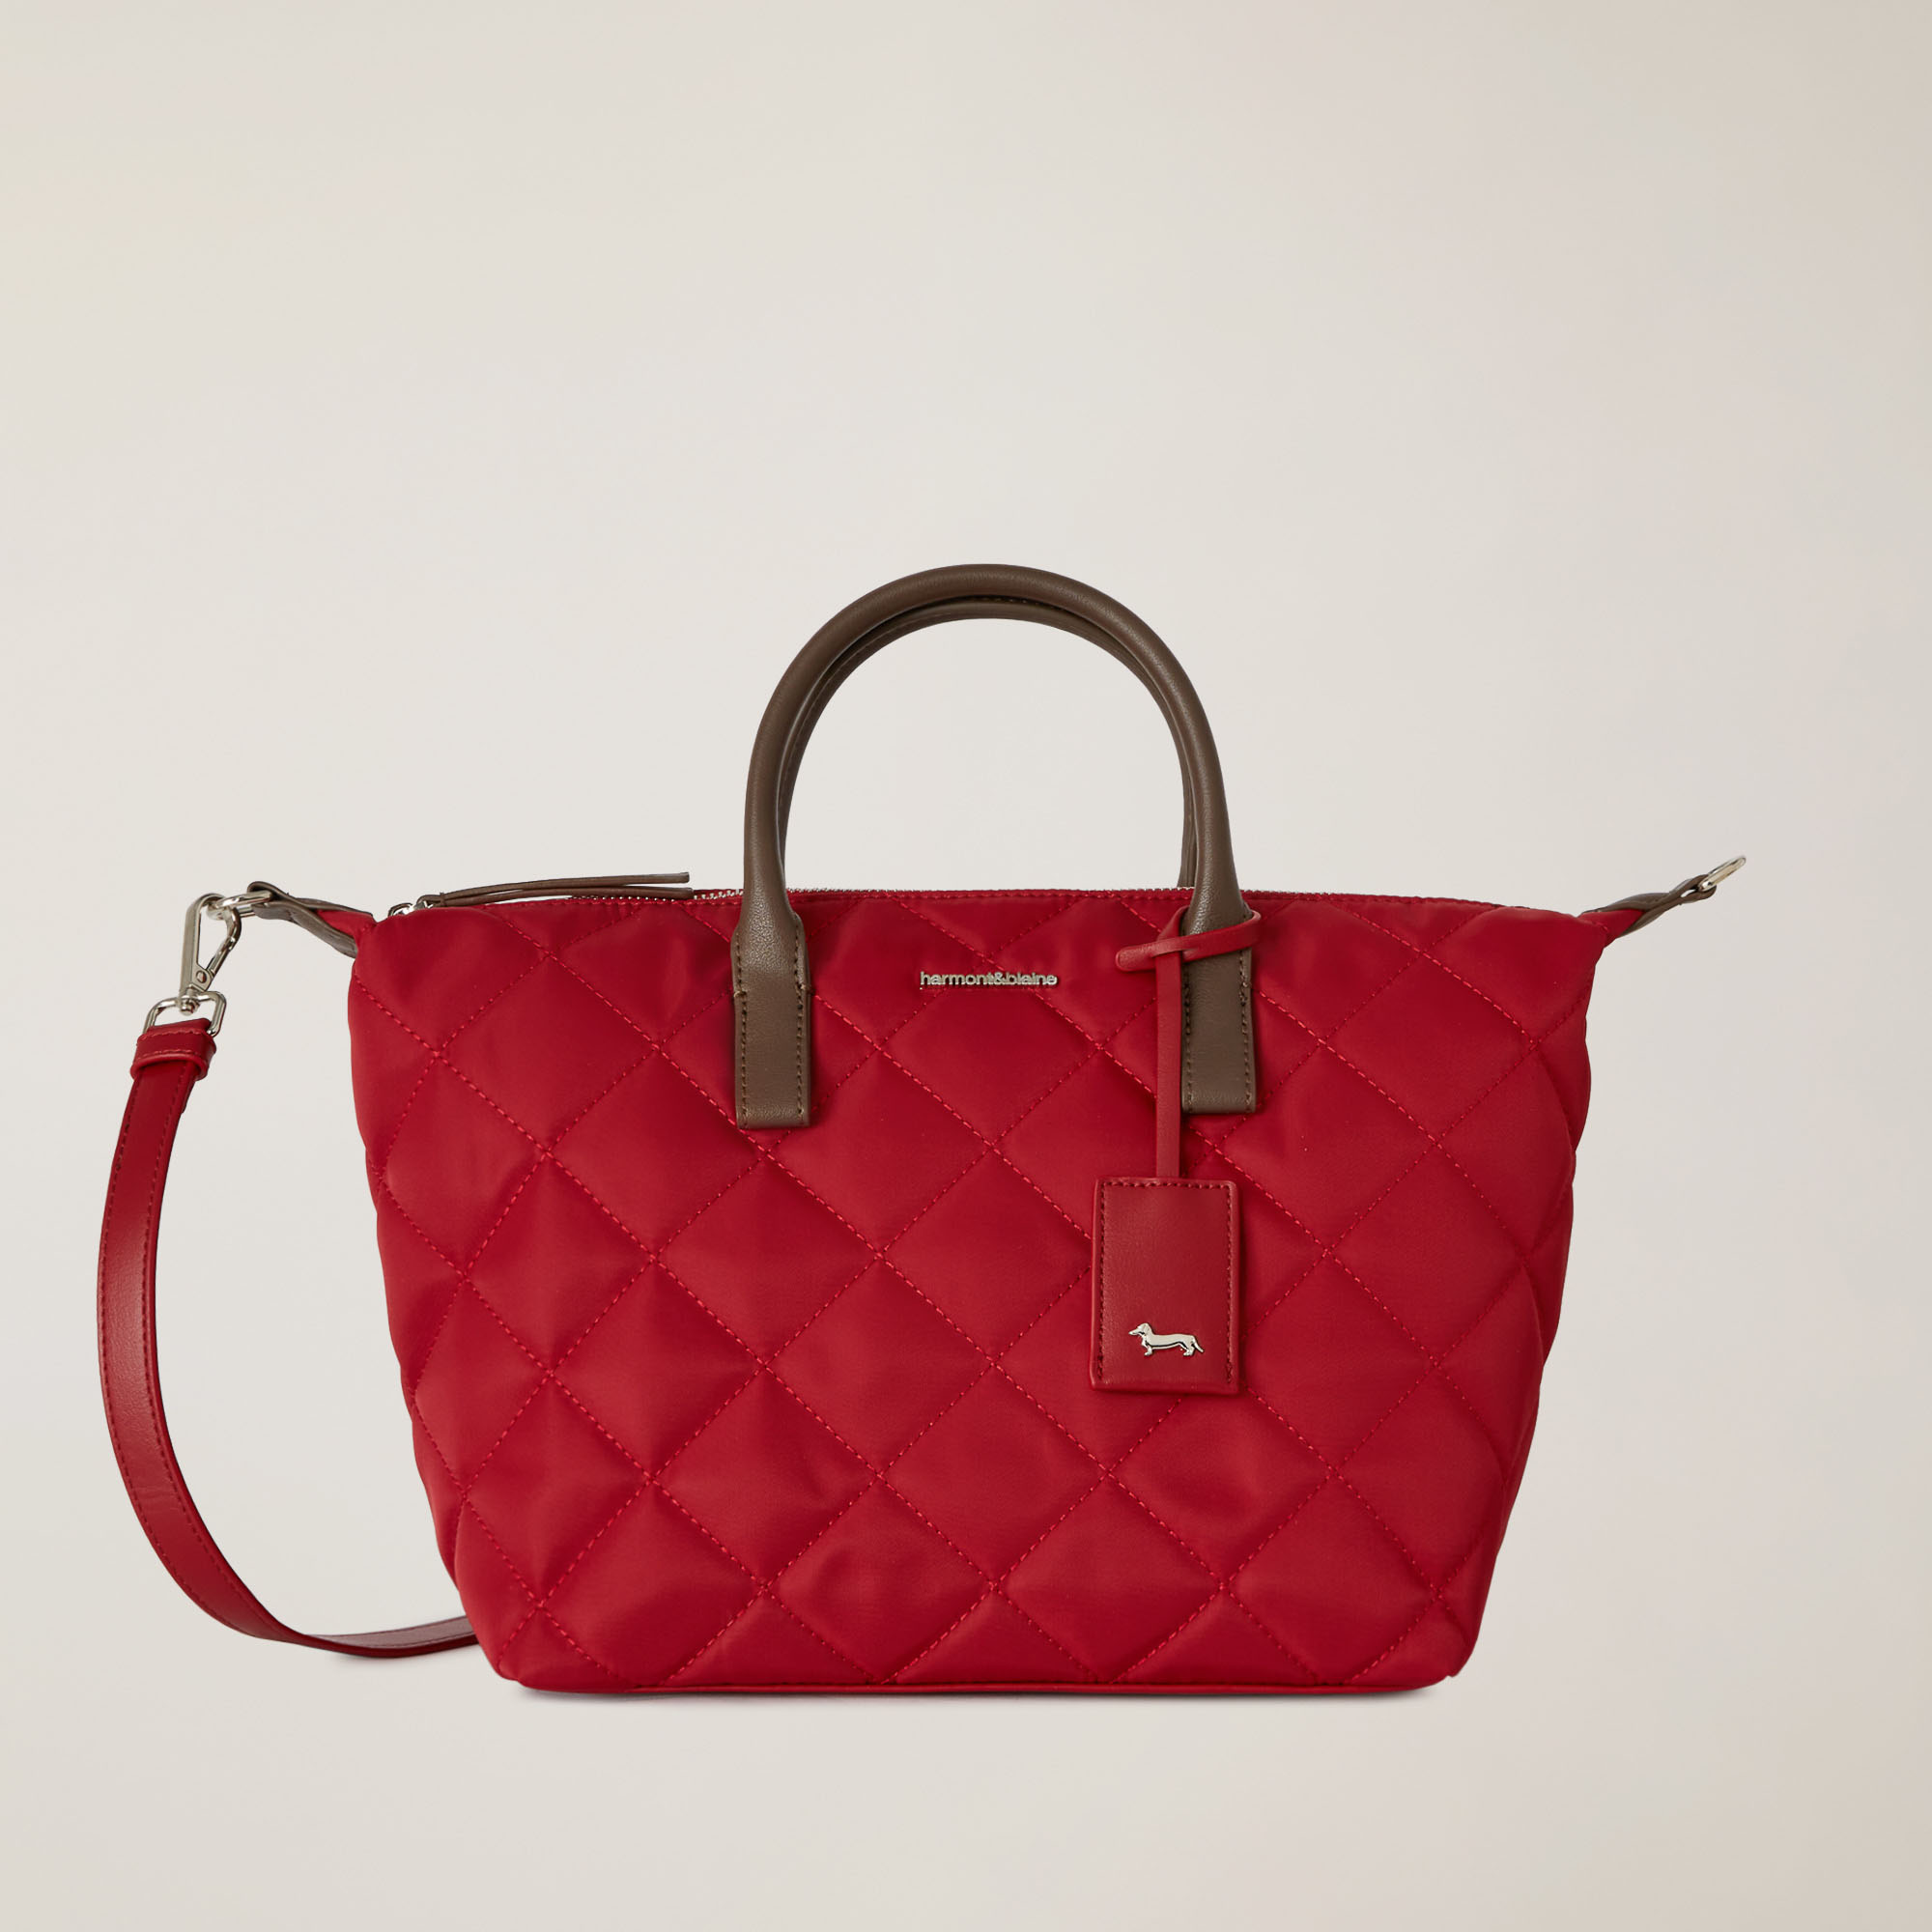 Medium Quilted Shopper Bag, Red, large